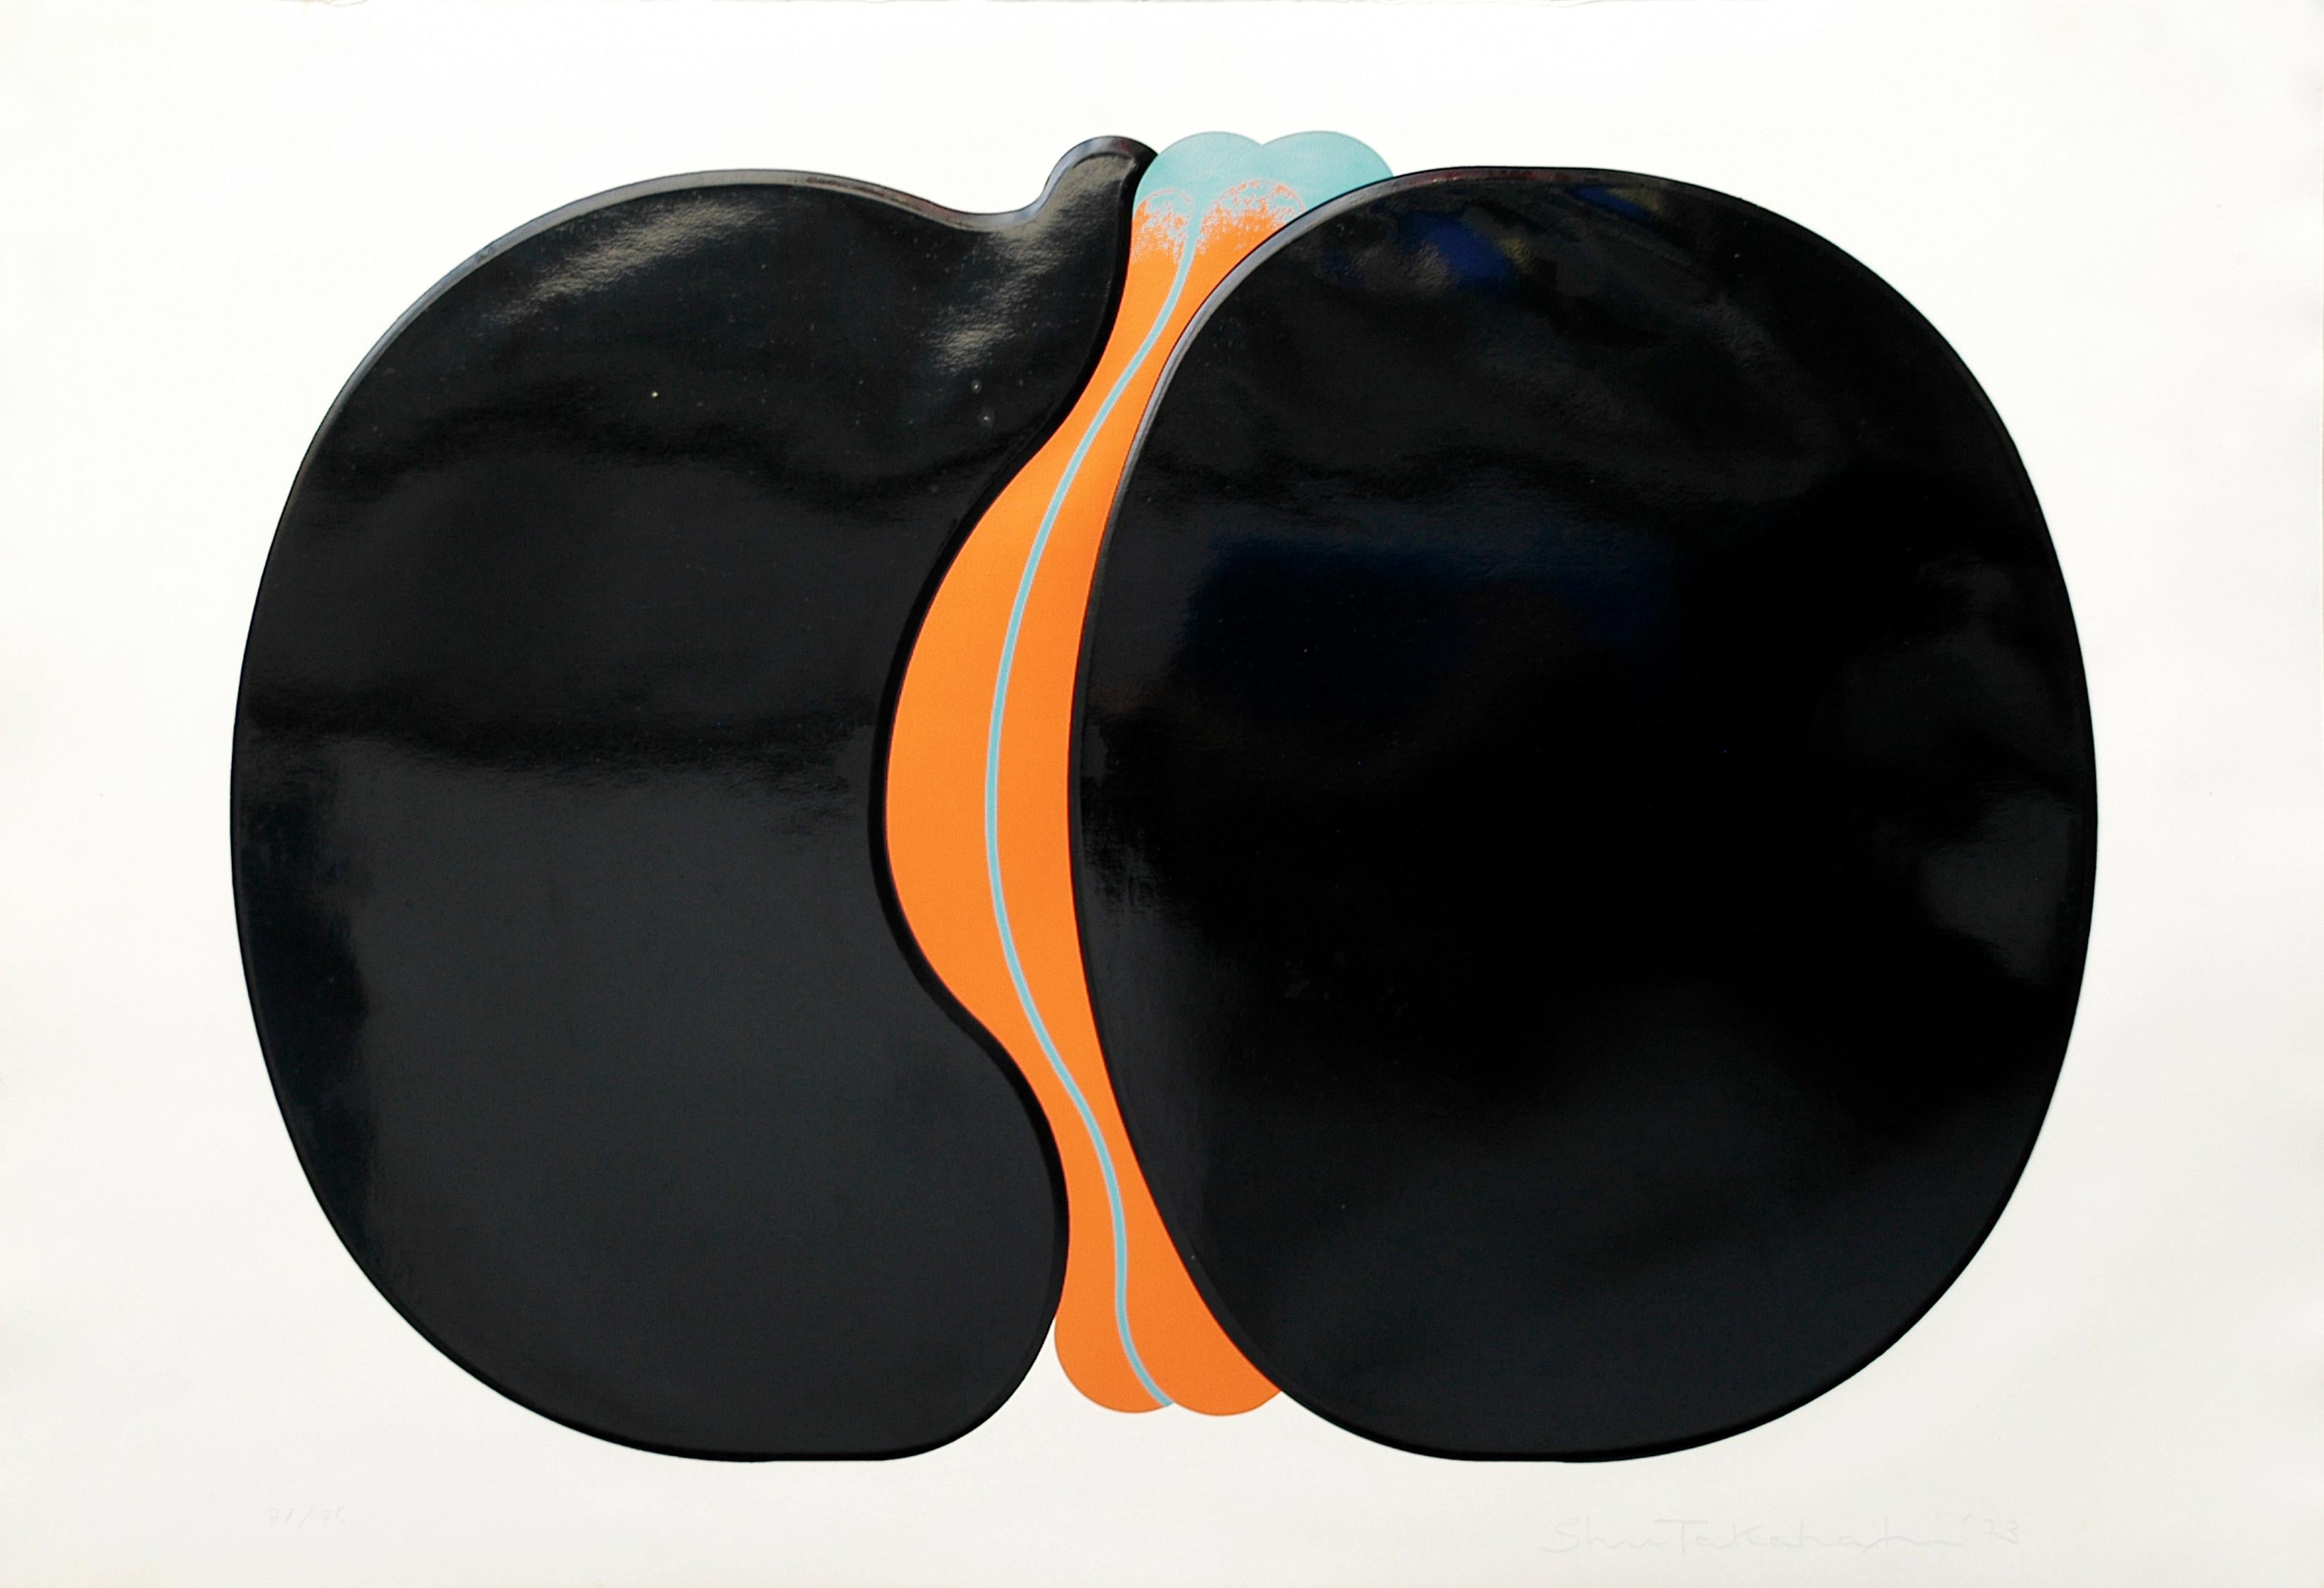 Untitled - Black Round is an original artwork realized by Shu Takahashi in 1973. Colored screenprint on heavy paper. Good conditions except for some foxing on the upper right margin. 

The artwork represents a big abstract black shape with two